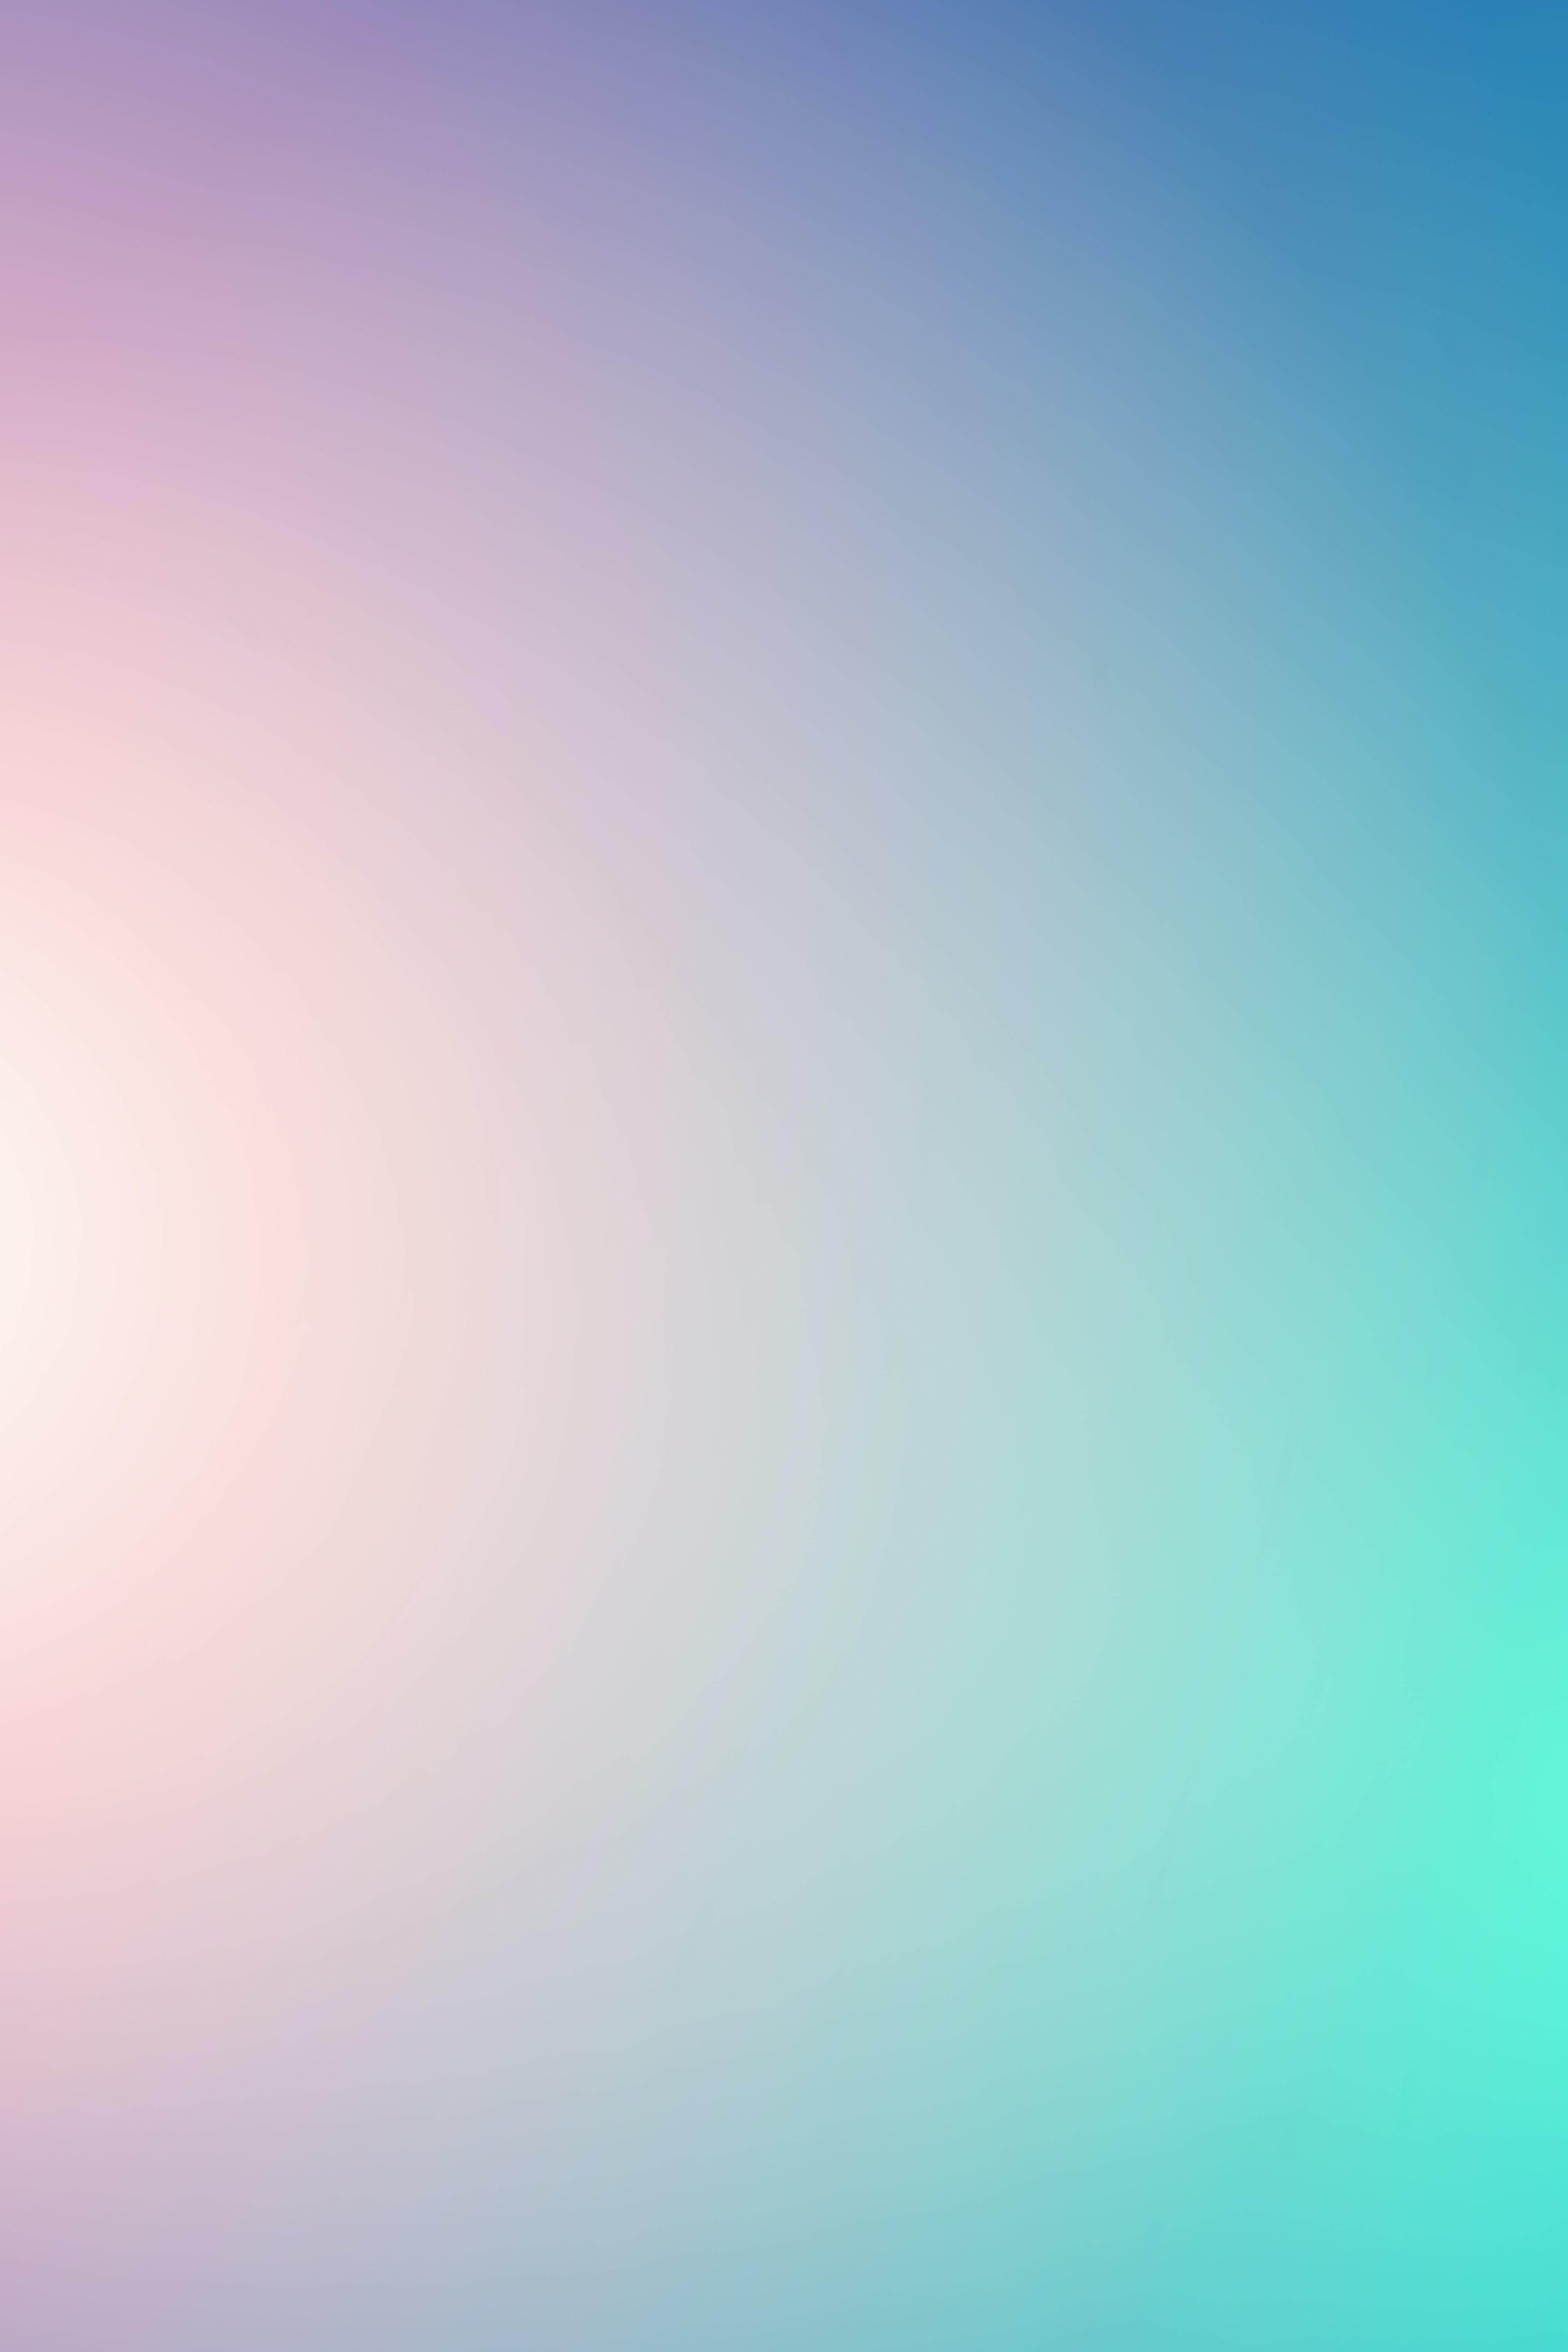 multicolored, gradient, motley, tender, abstract for android